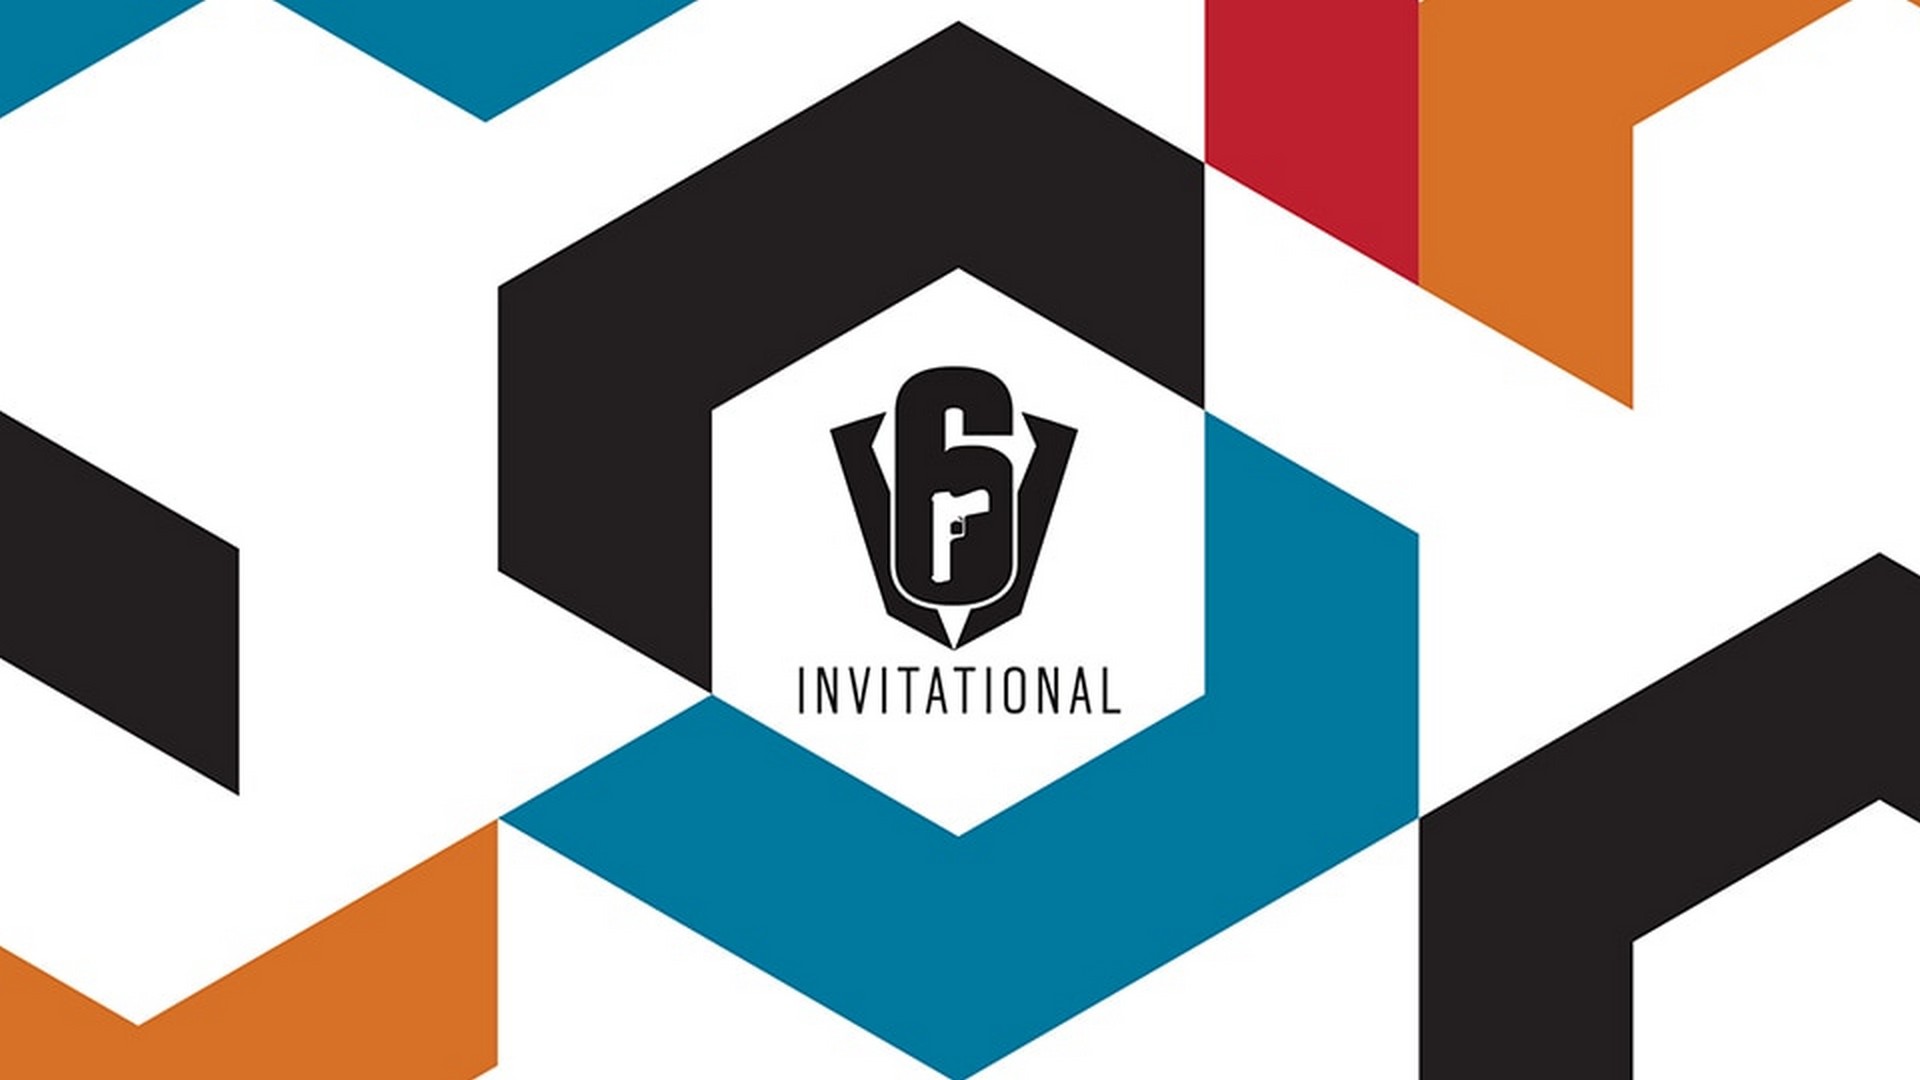 Tom Clancy’s Rainbow Six Invitational Kicks Off On May 11 In Paris, France With All Four Regions Across The World And 19 Teams